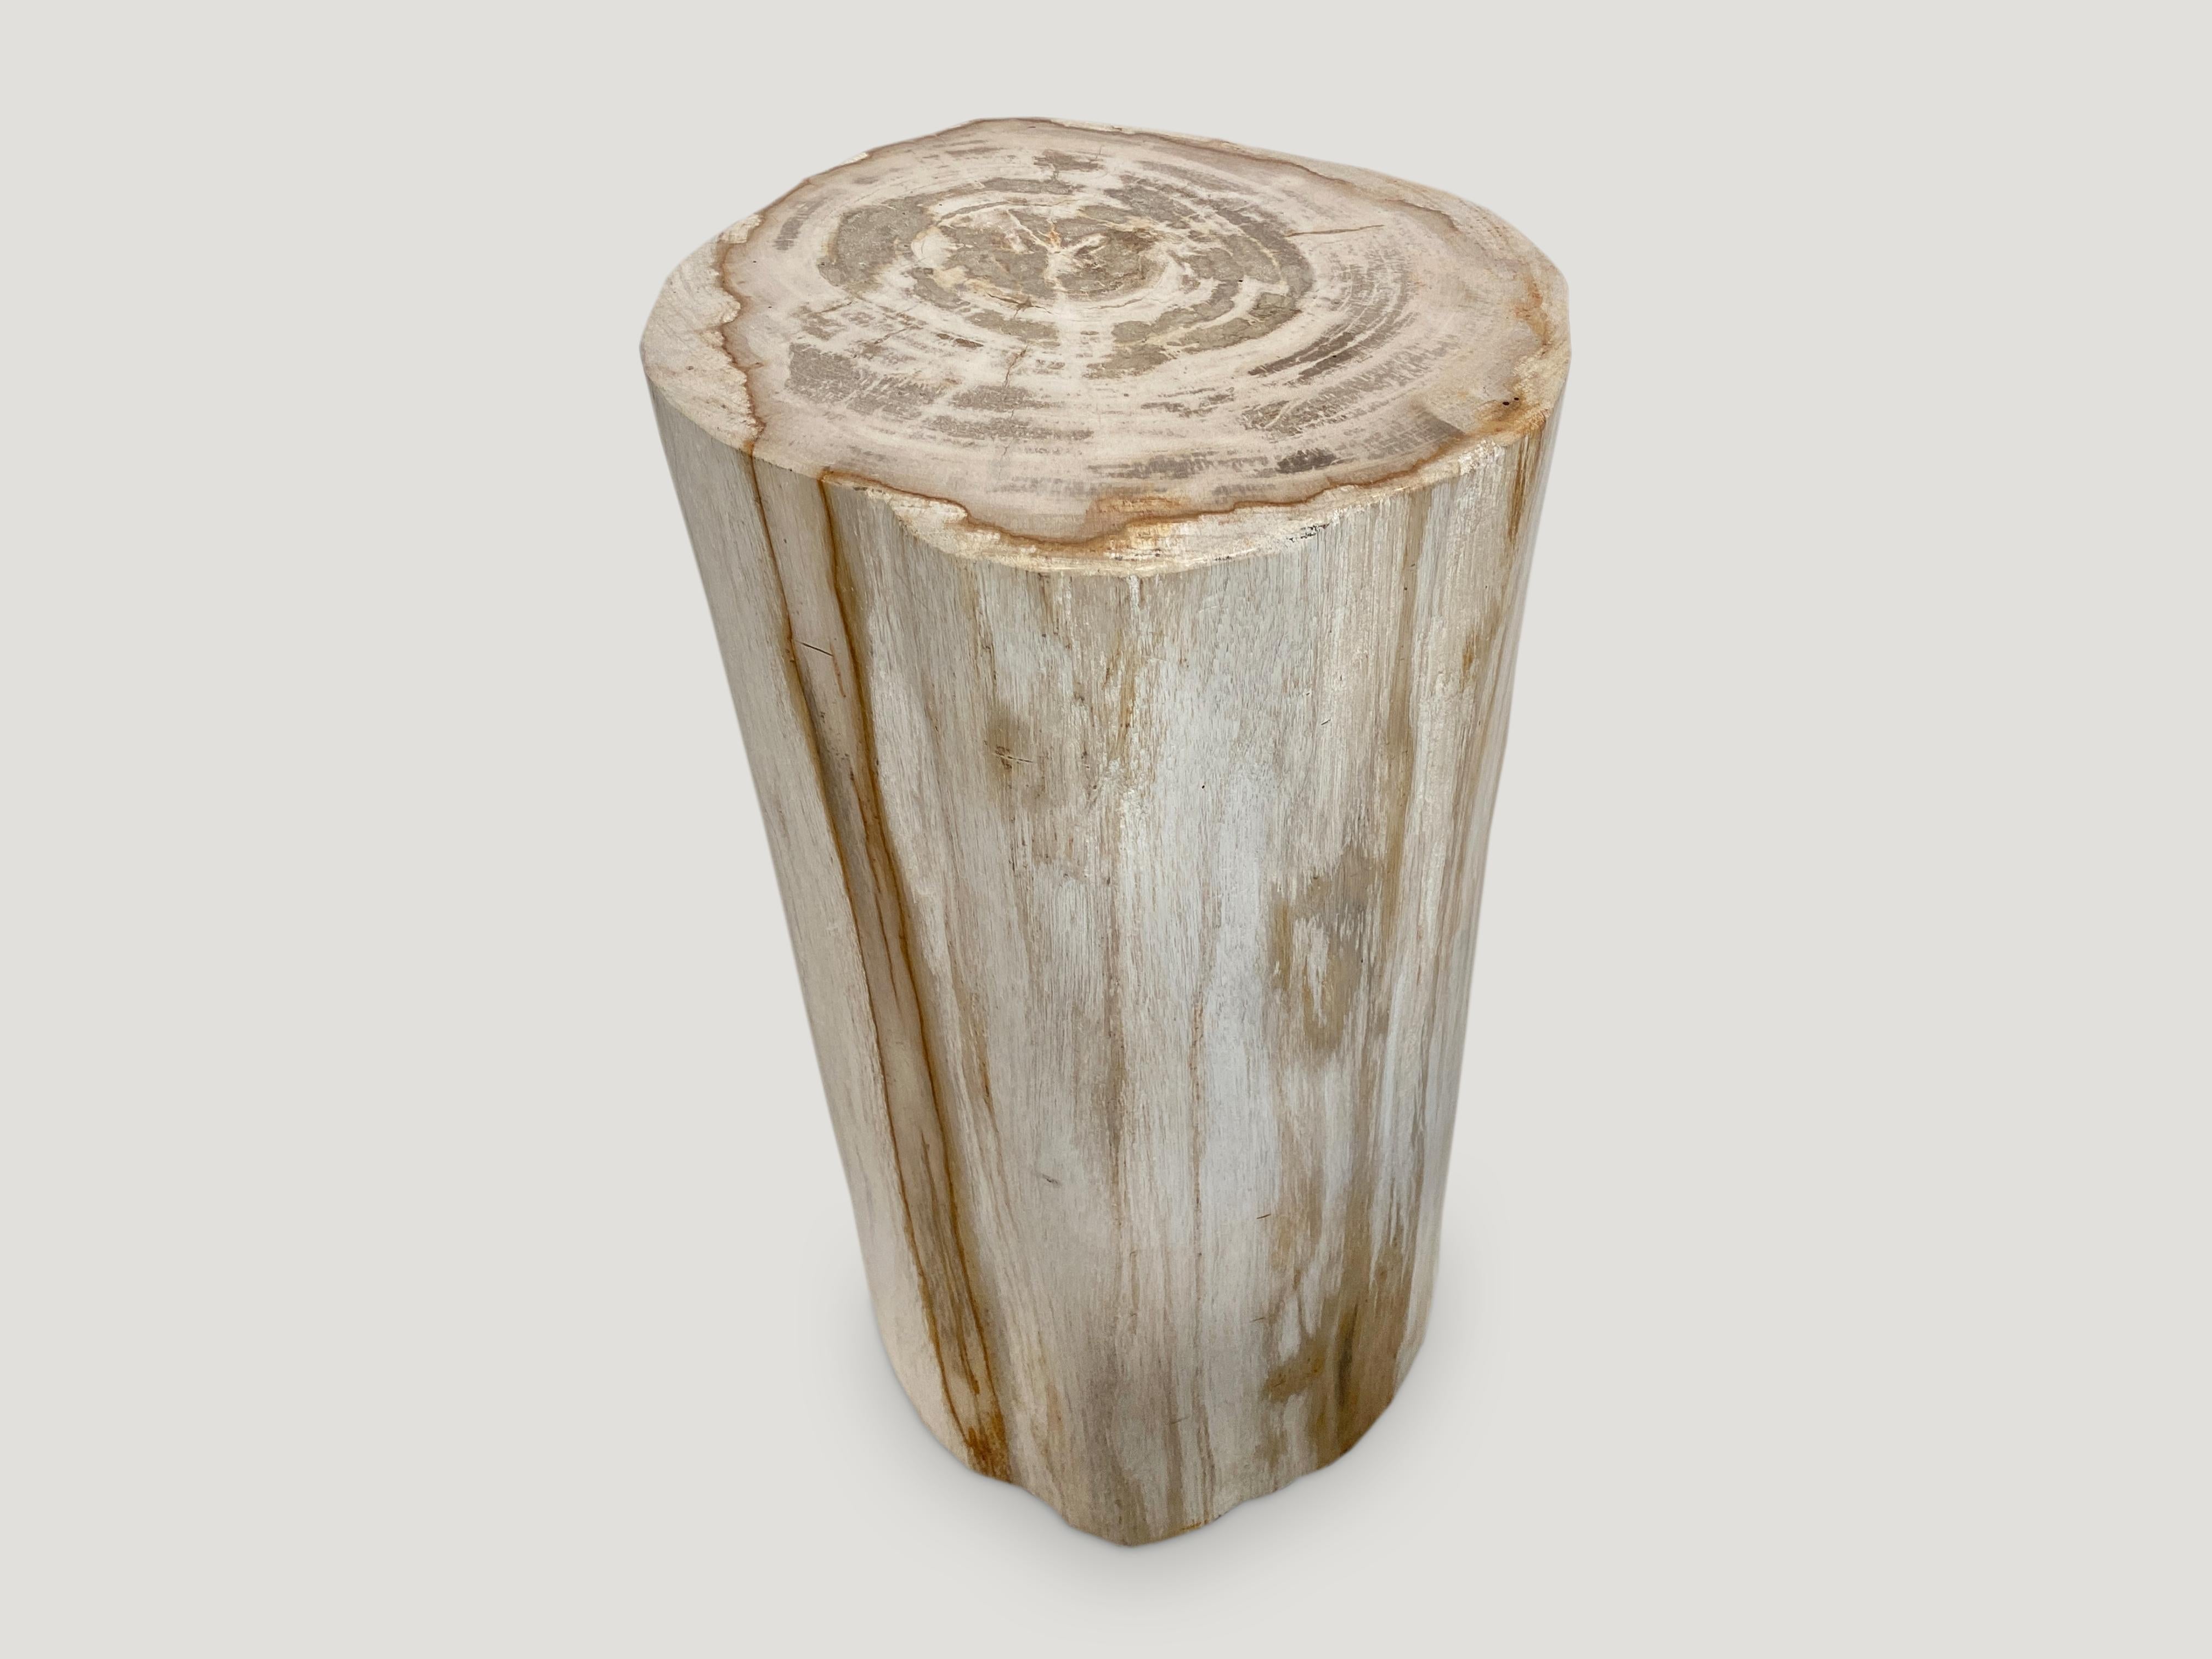 Beautiful column shape minimalist petrified wood side table or pedestal. This pale color is hard to source. We have a pair cut from the same petrified wood log. The size and price reflect the one shown.

As with a diamond, we polish the highest